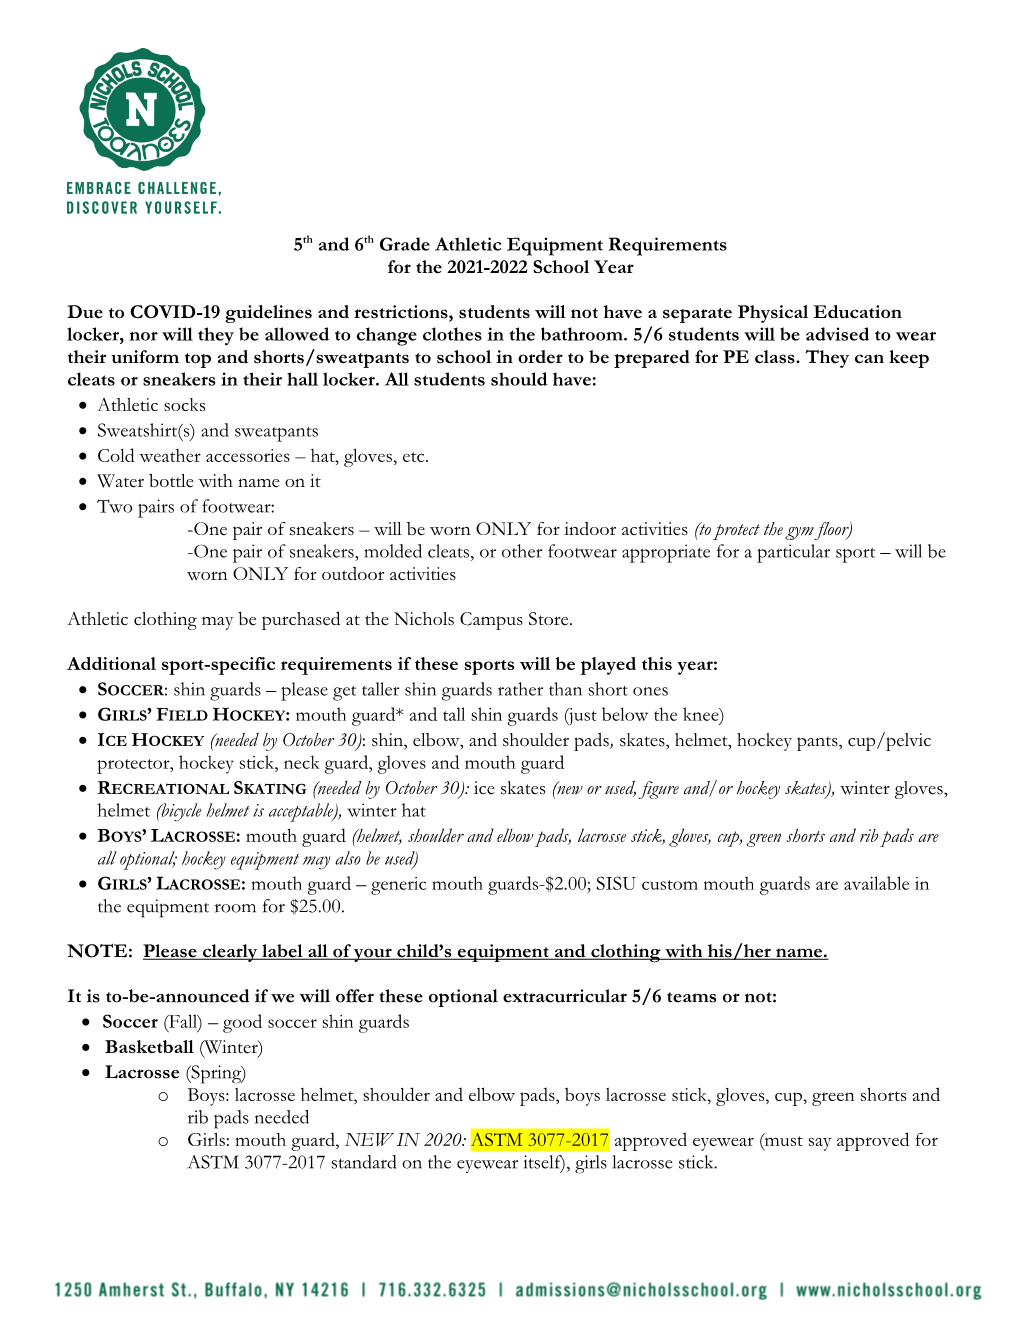 5Th and 6Th Grade Athletic Equipment Requirements for the 2021-2022 School Year